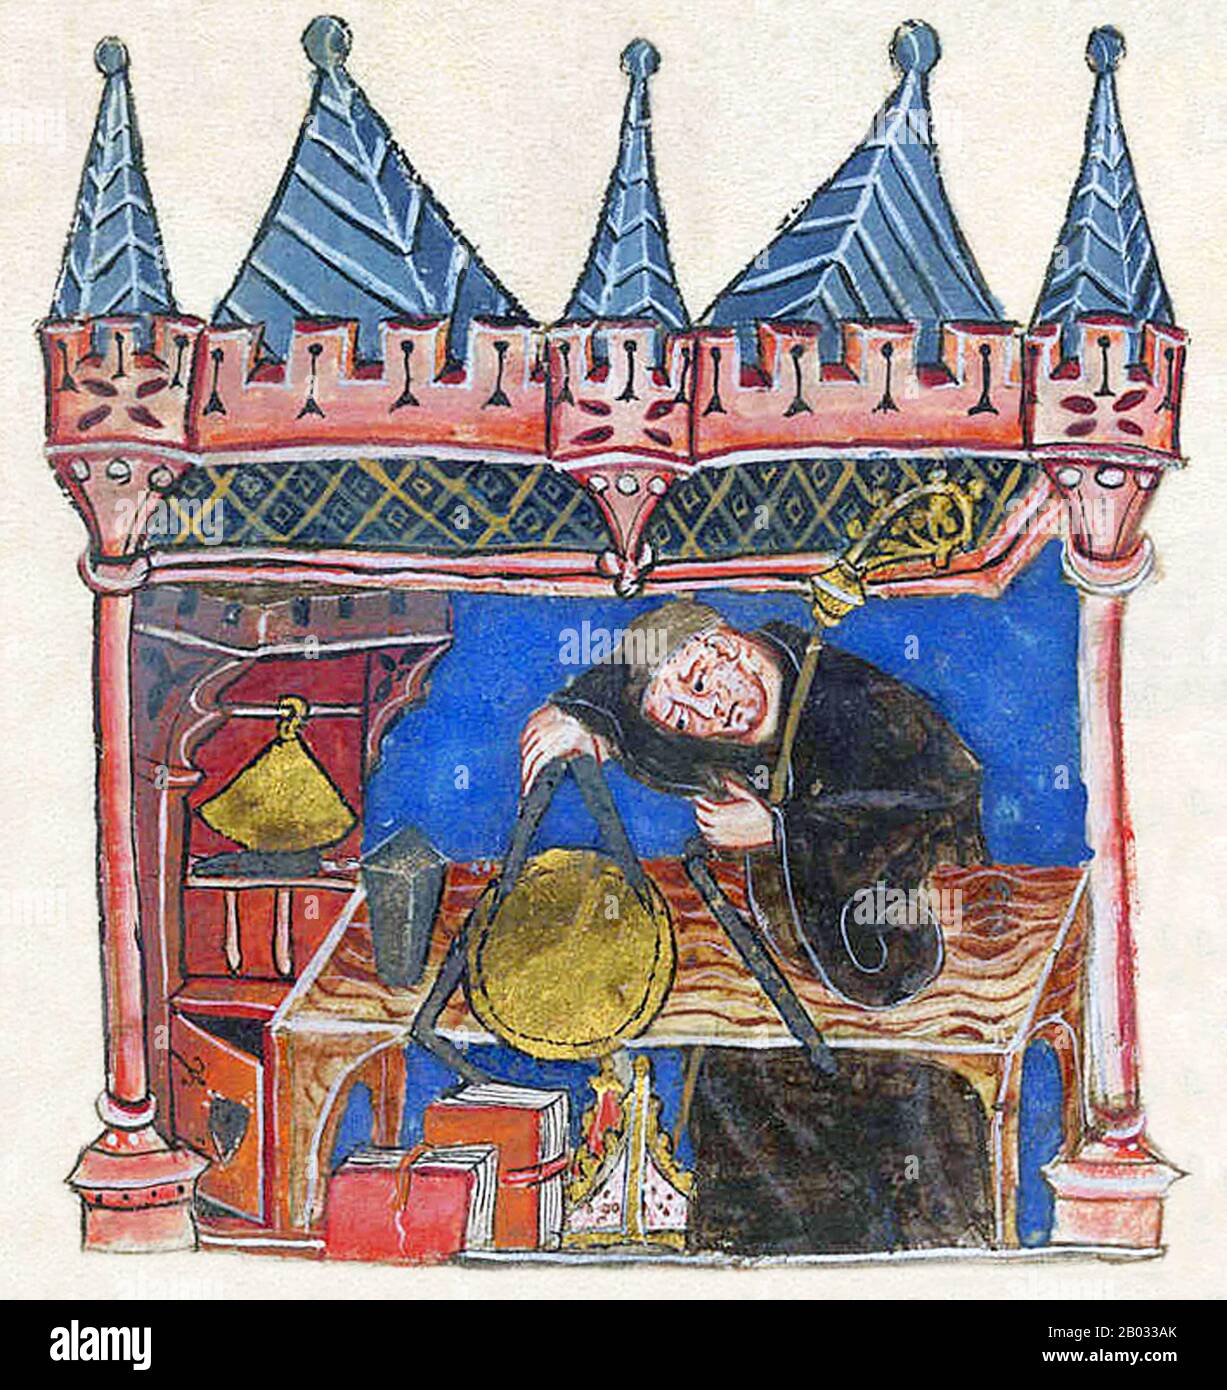 Richard of Wallingford (1292–1336) was a catholic monk and English mathematician who made major contributions to astronomy and horology while serving as abbot of St Albans Abbey in Hertfordshire. Stock Photo